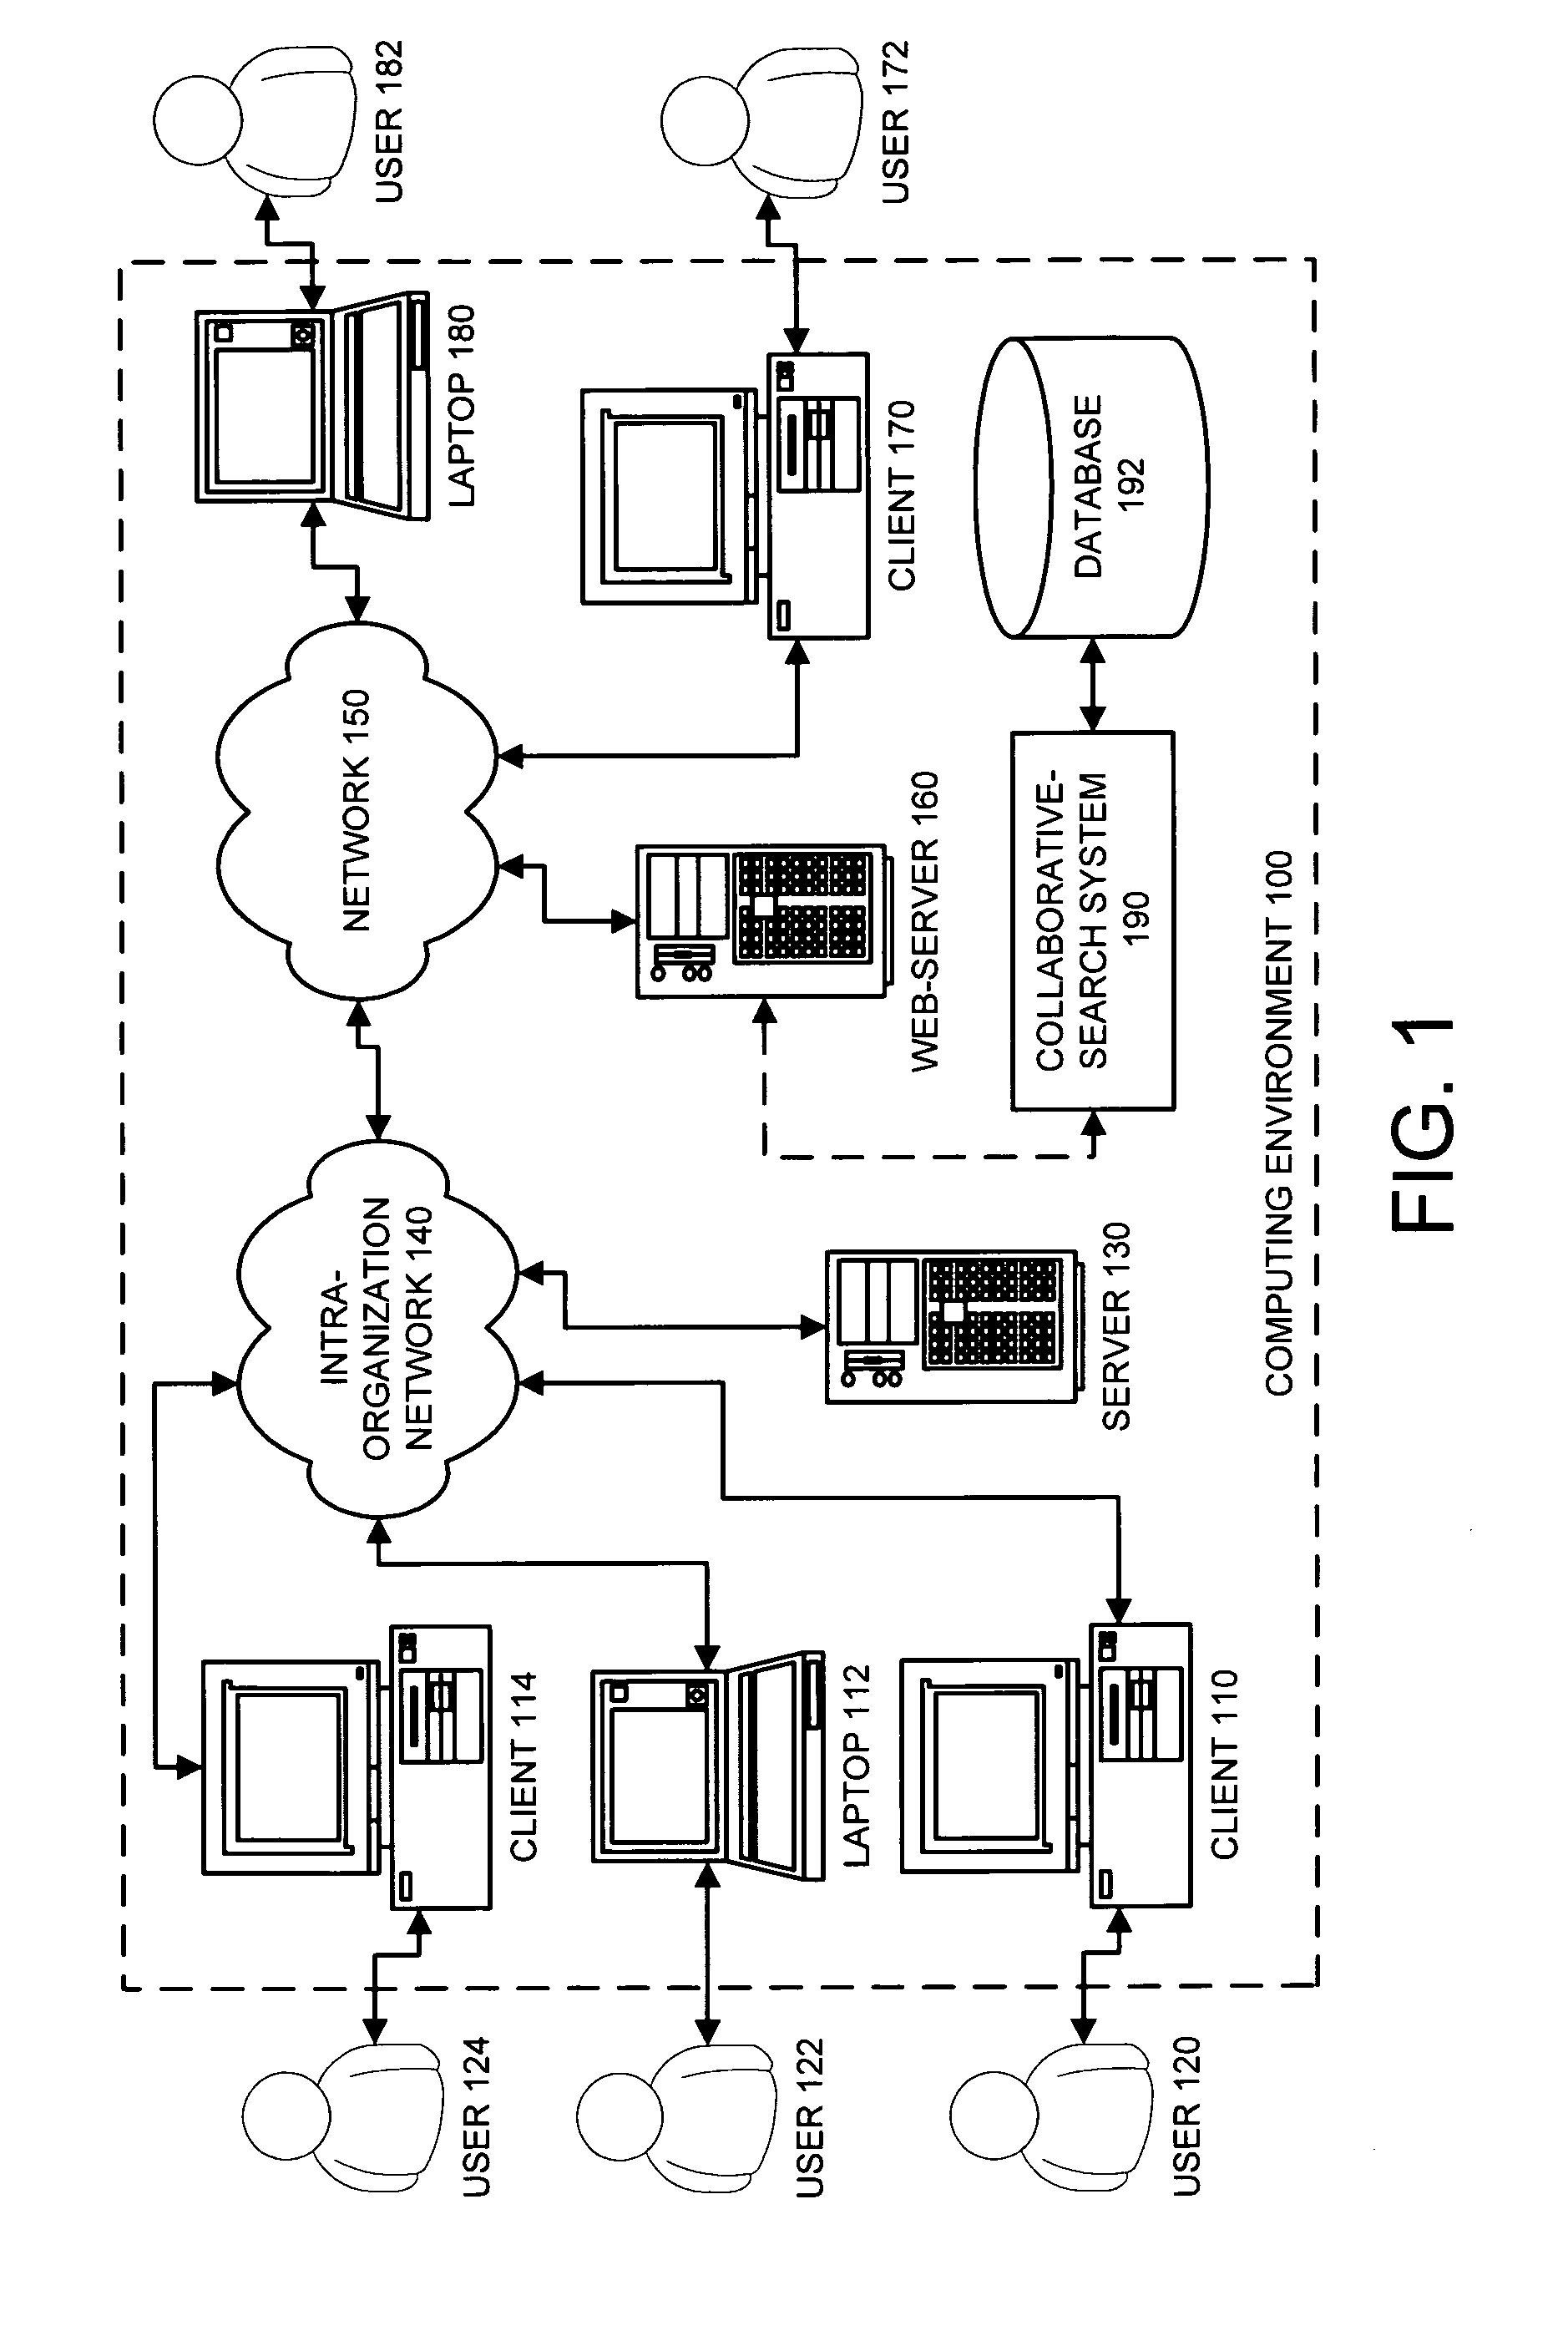 Method and apparatus for performing collaborative searches